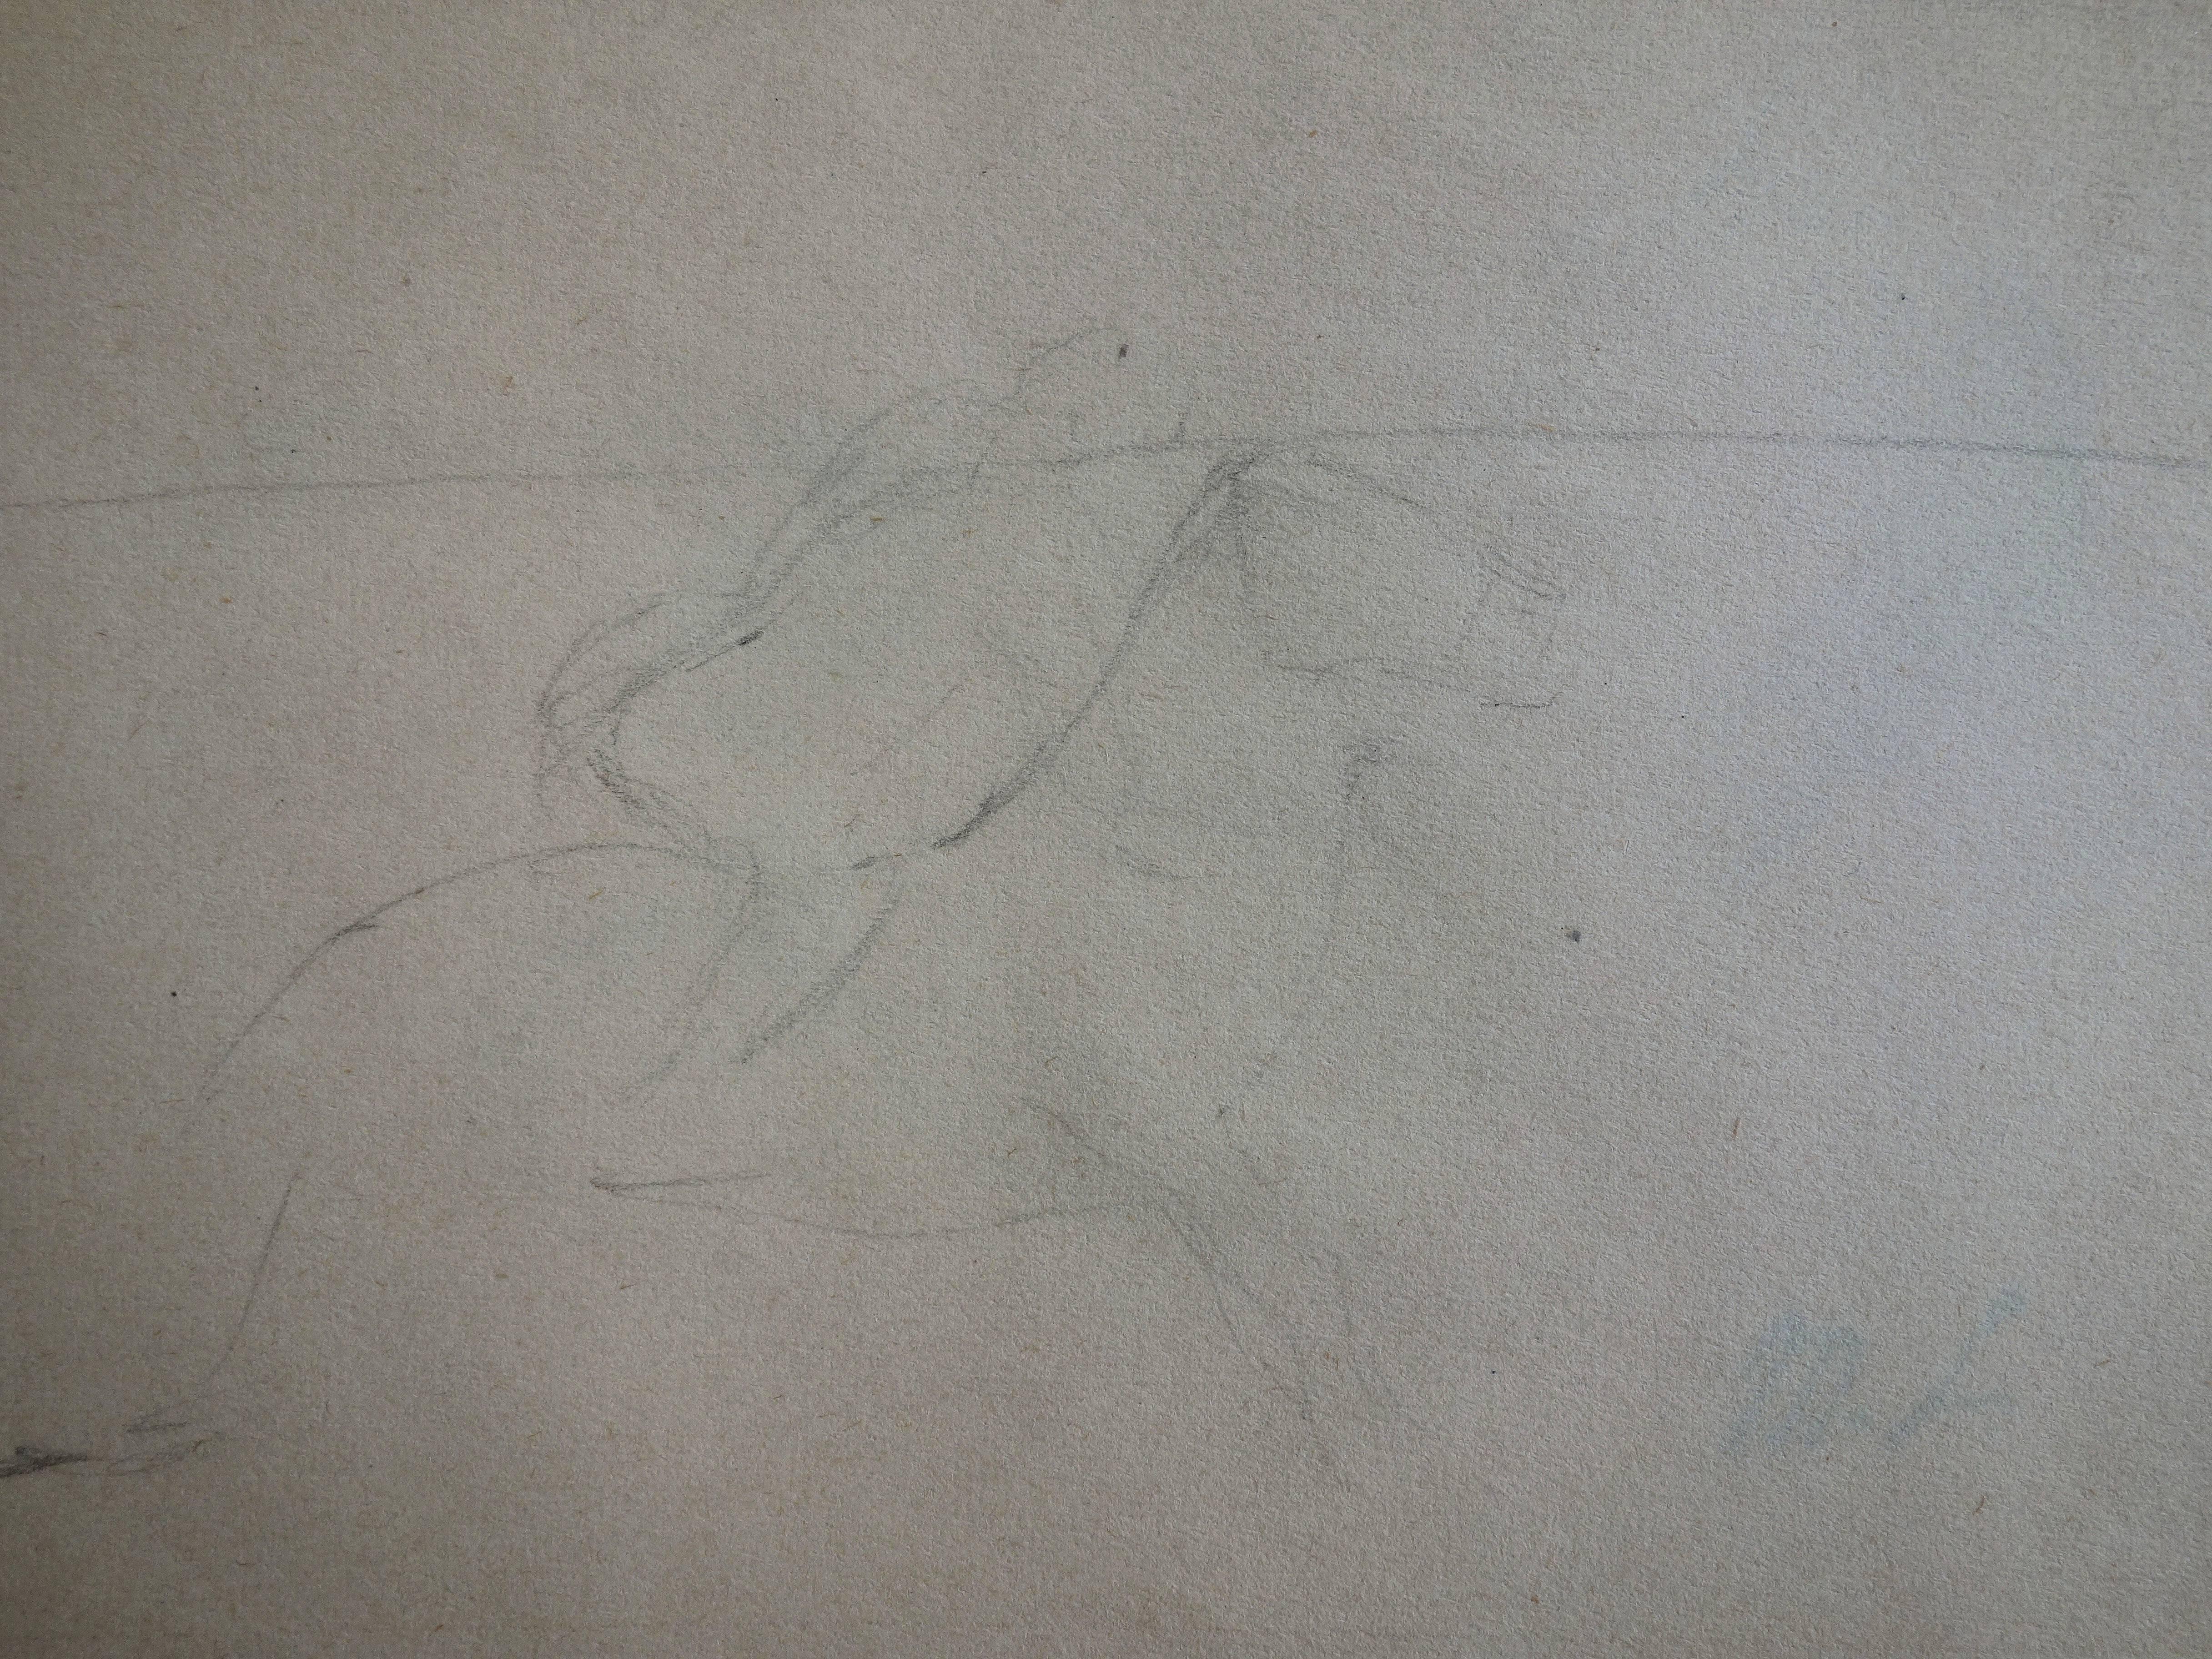 Drawing of knight on horse - Original pencil drawing - Art by Marie Laurencin